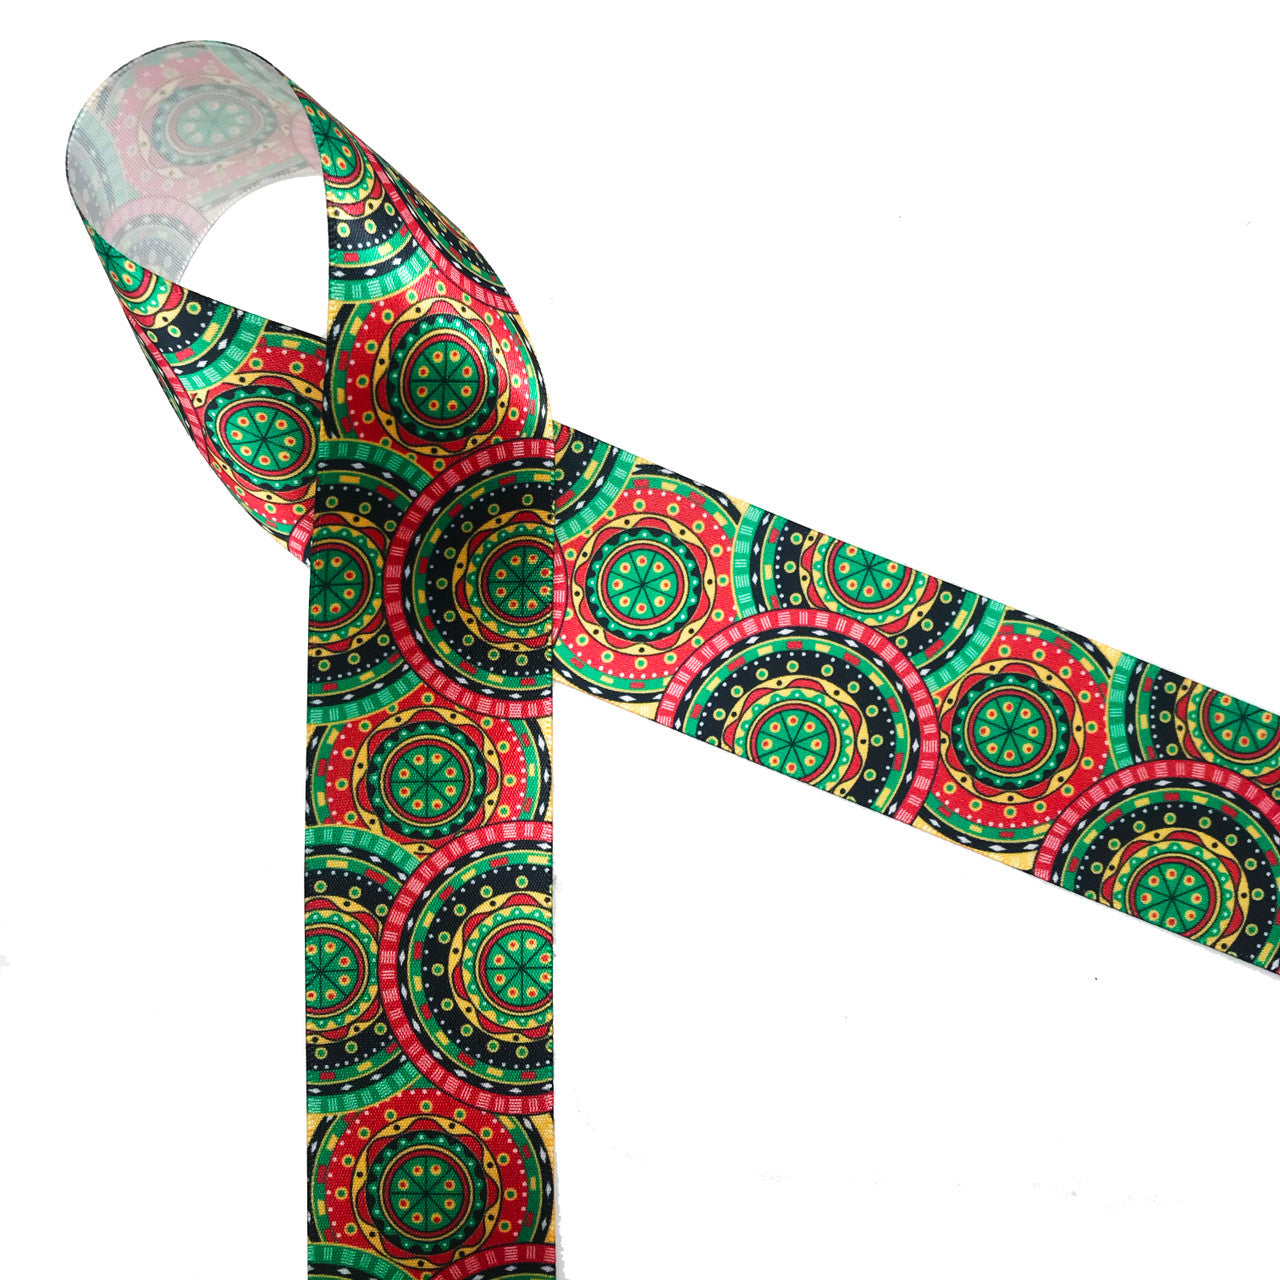 African tribal medallion print in pink, green, black and yellow printed on 1.5" white single face satin ribbon is an ideal ribbon for  hair bows, head bands, gift wrap, Kwanza, festivals and cultural celebrations. Be sure to have this ribbon on hand for crafts, quilting, sewing and craft projects. All our ribbons are designed and printed in the USA